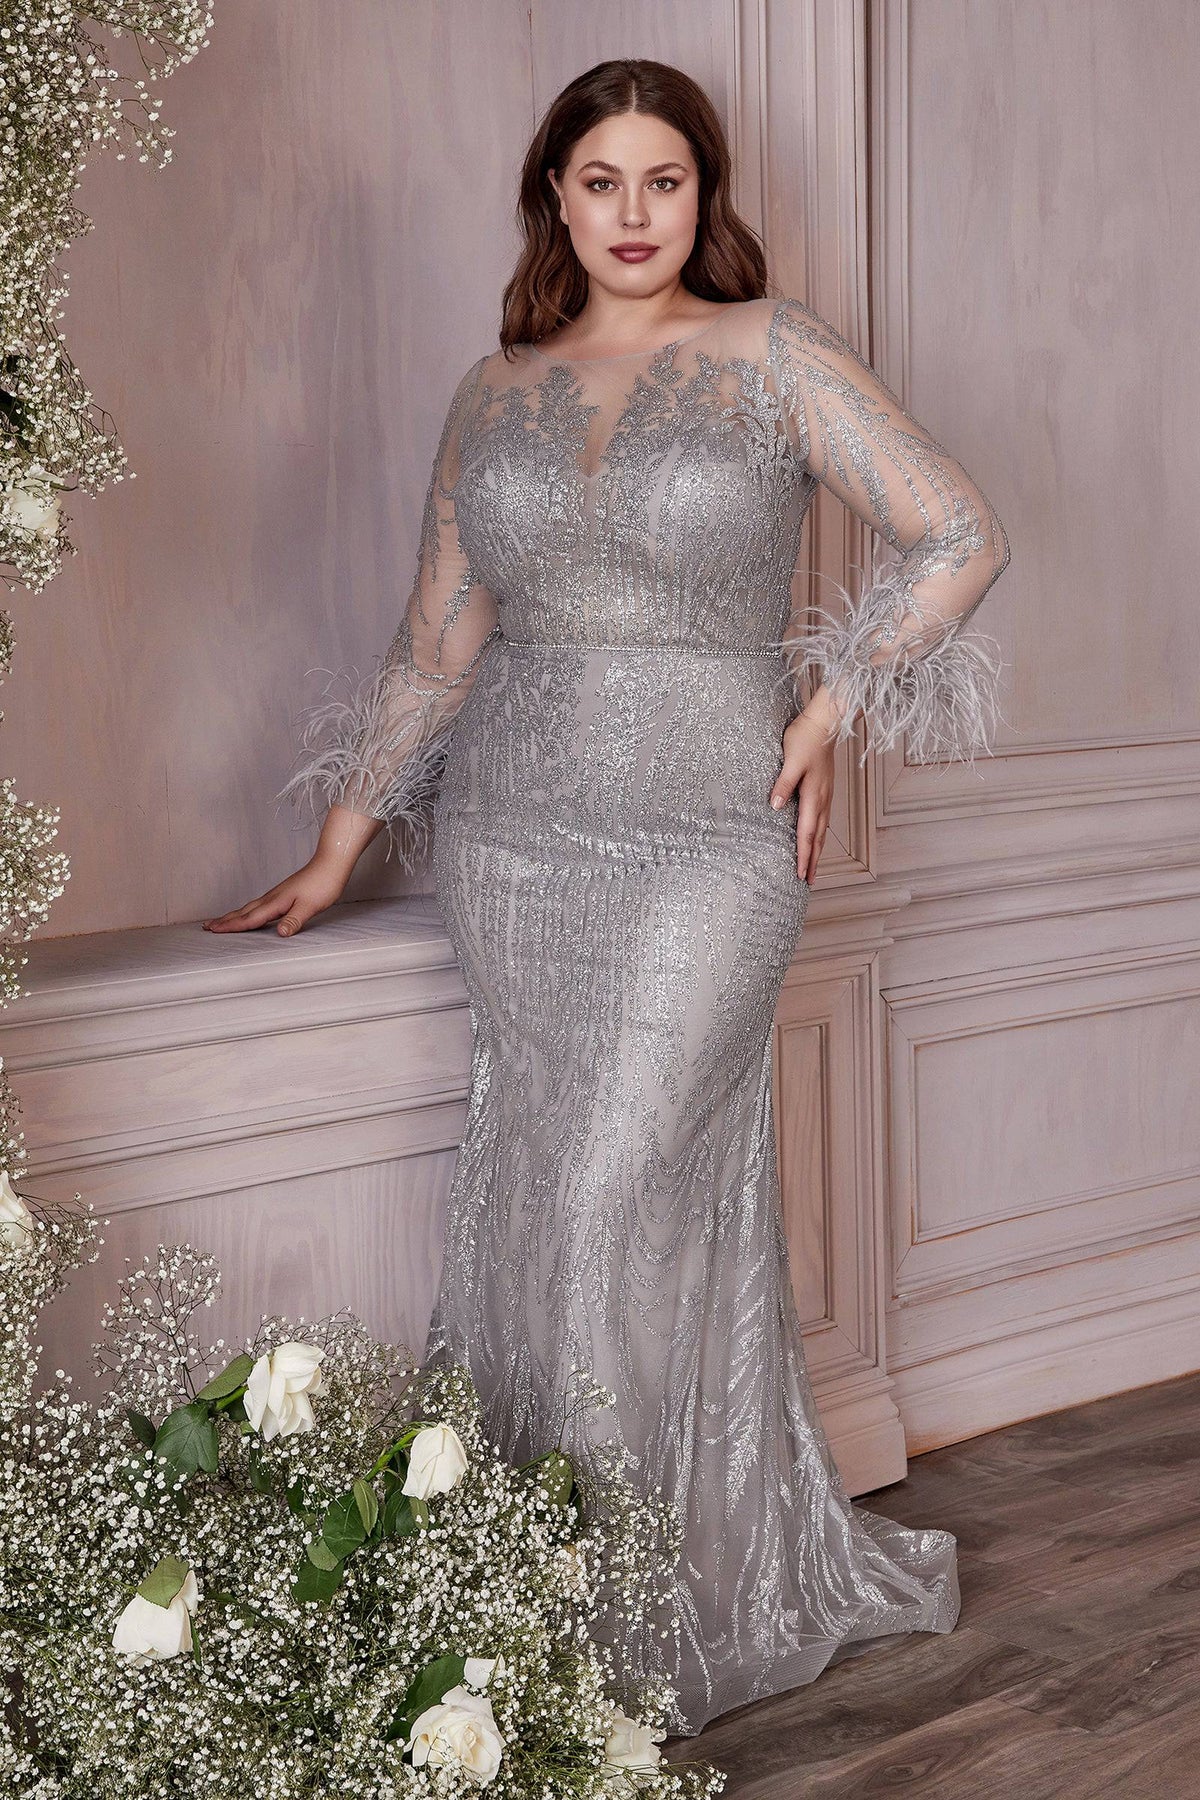 Elegant Plus-Size Sheer Crystal-Infused Gown with Feather Sleeve Accents #CDCB090 - NORMA REED